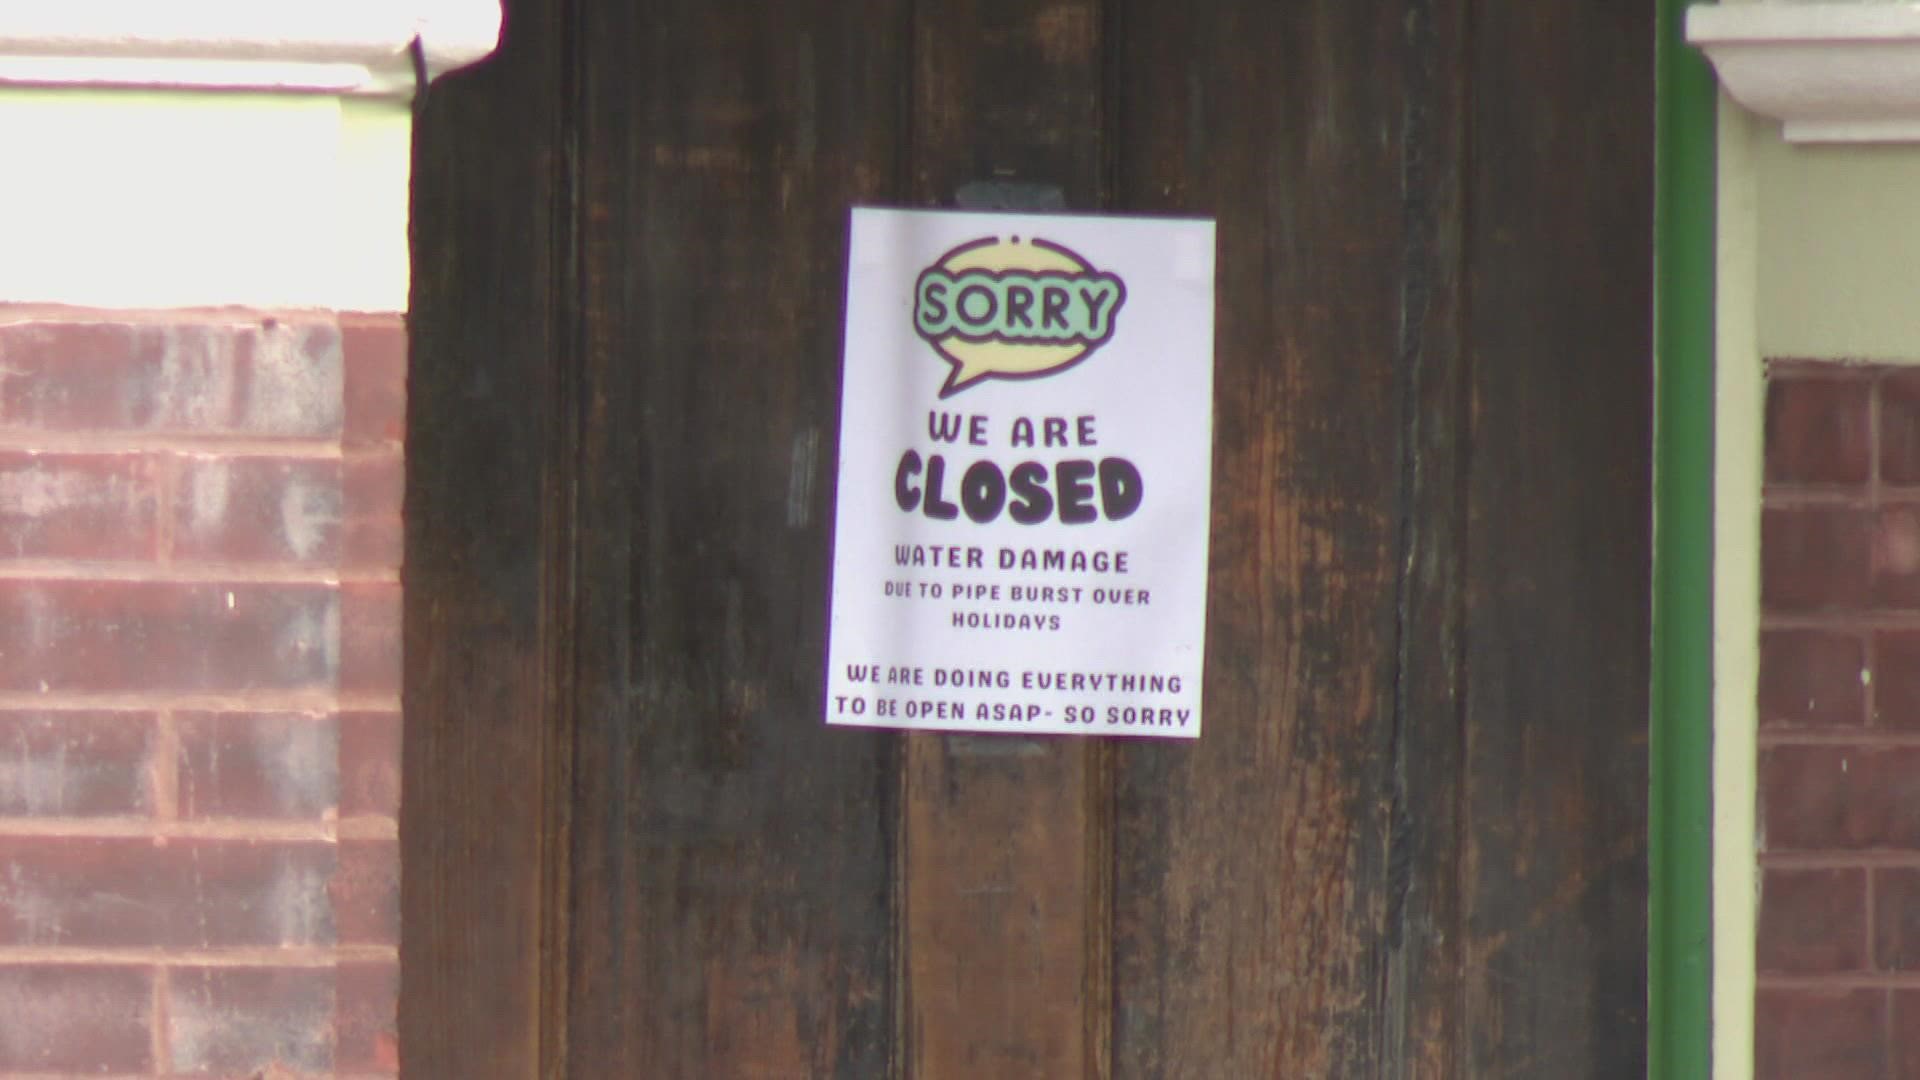 A GoFundMe was created Thursday to help the restaurant reopen their doors.